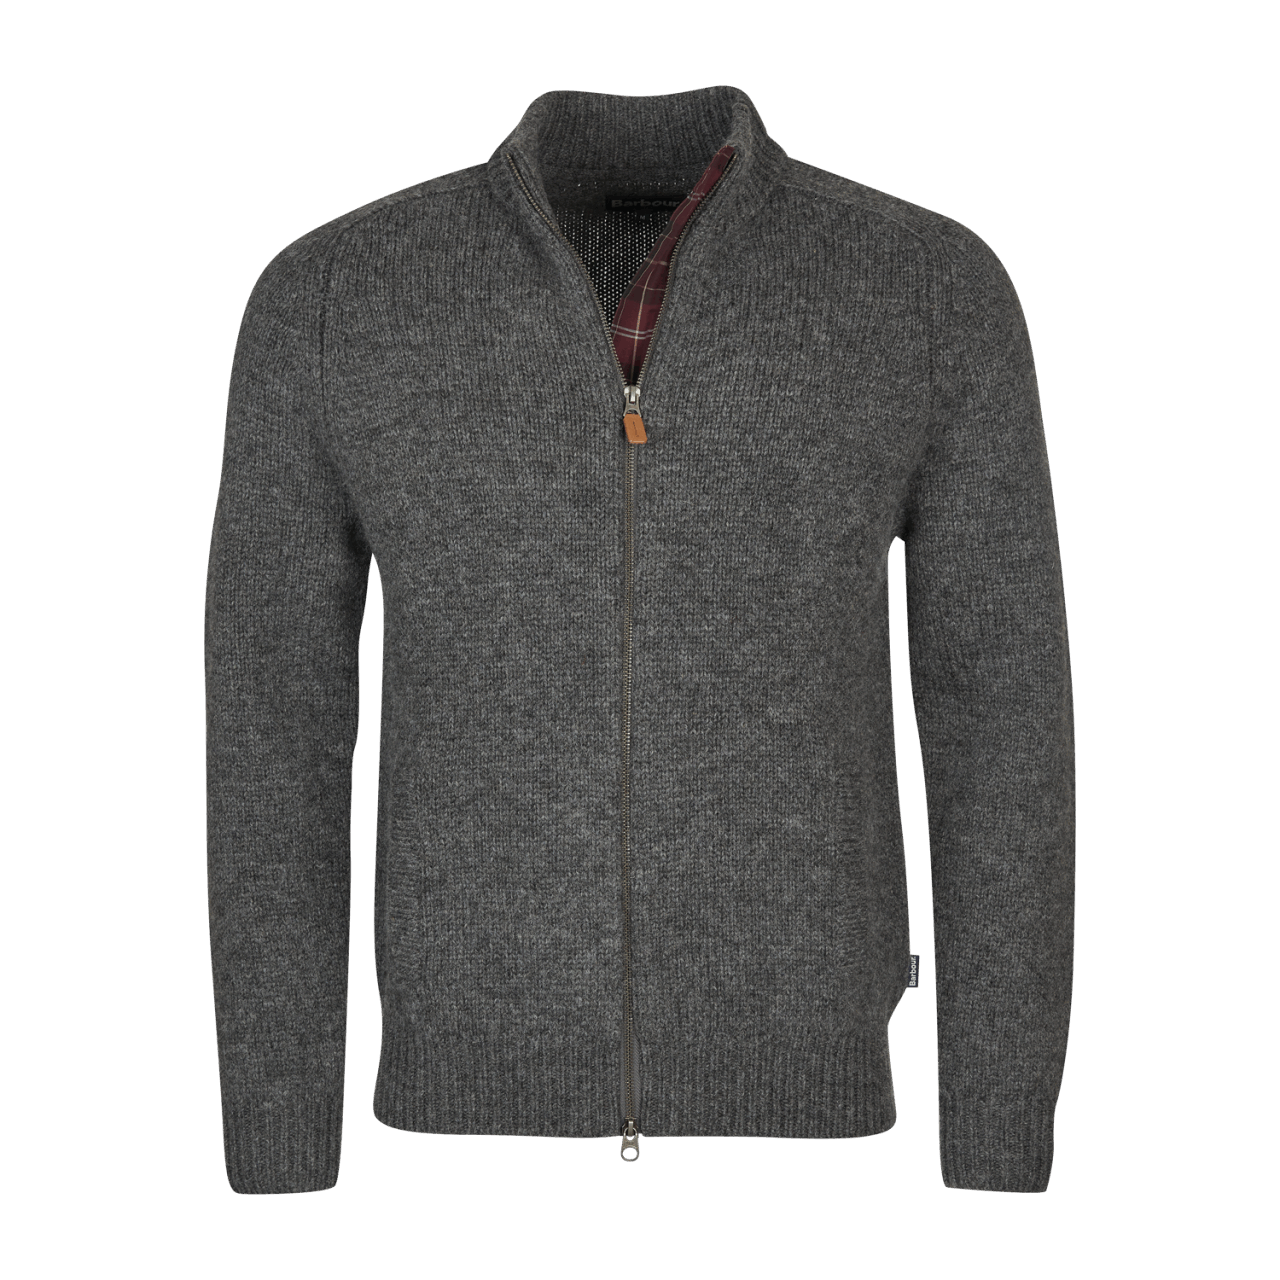 Barbour Calder Knitted Zip - charcoal marl